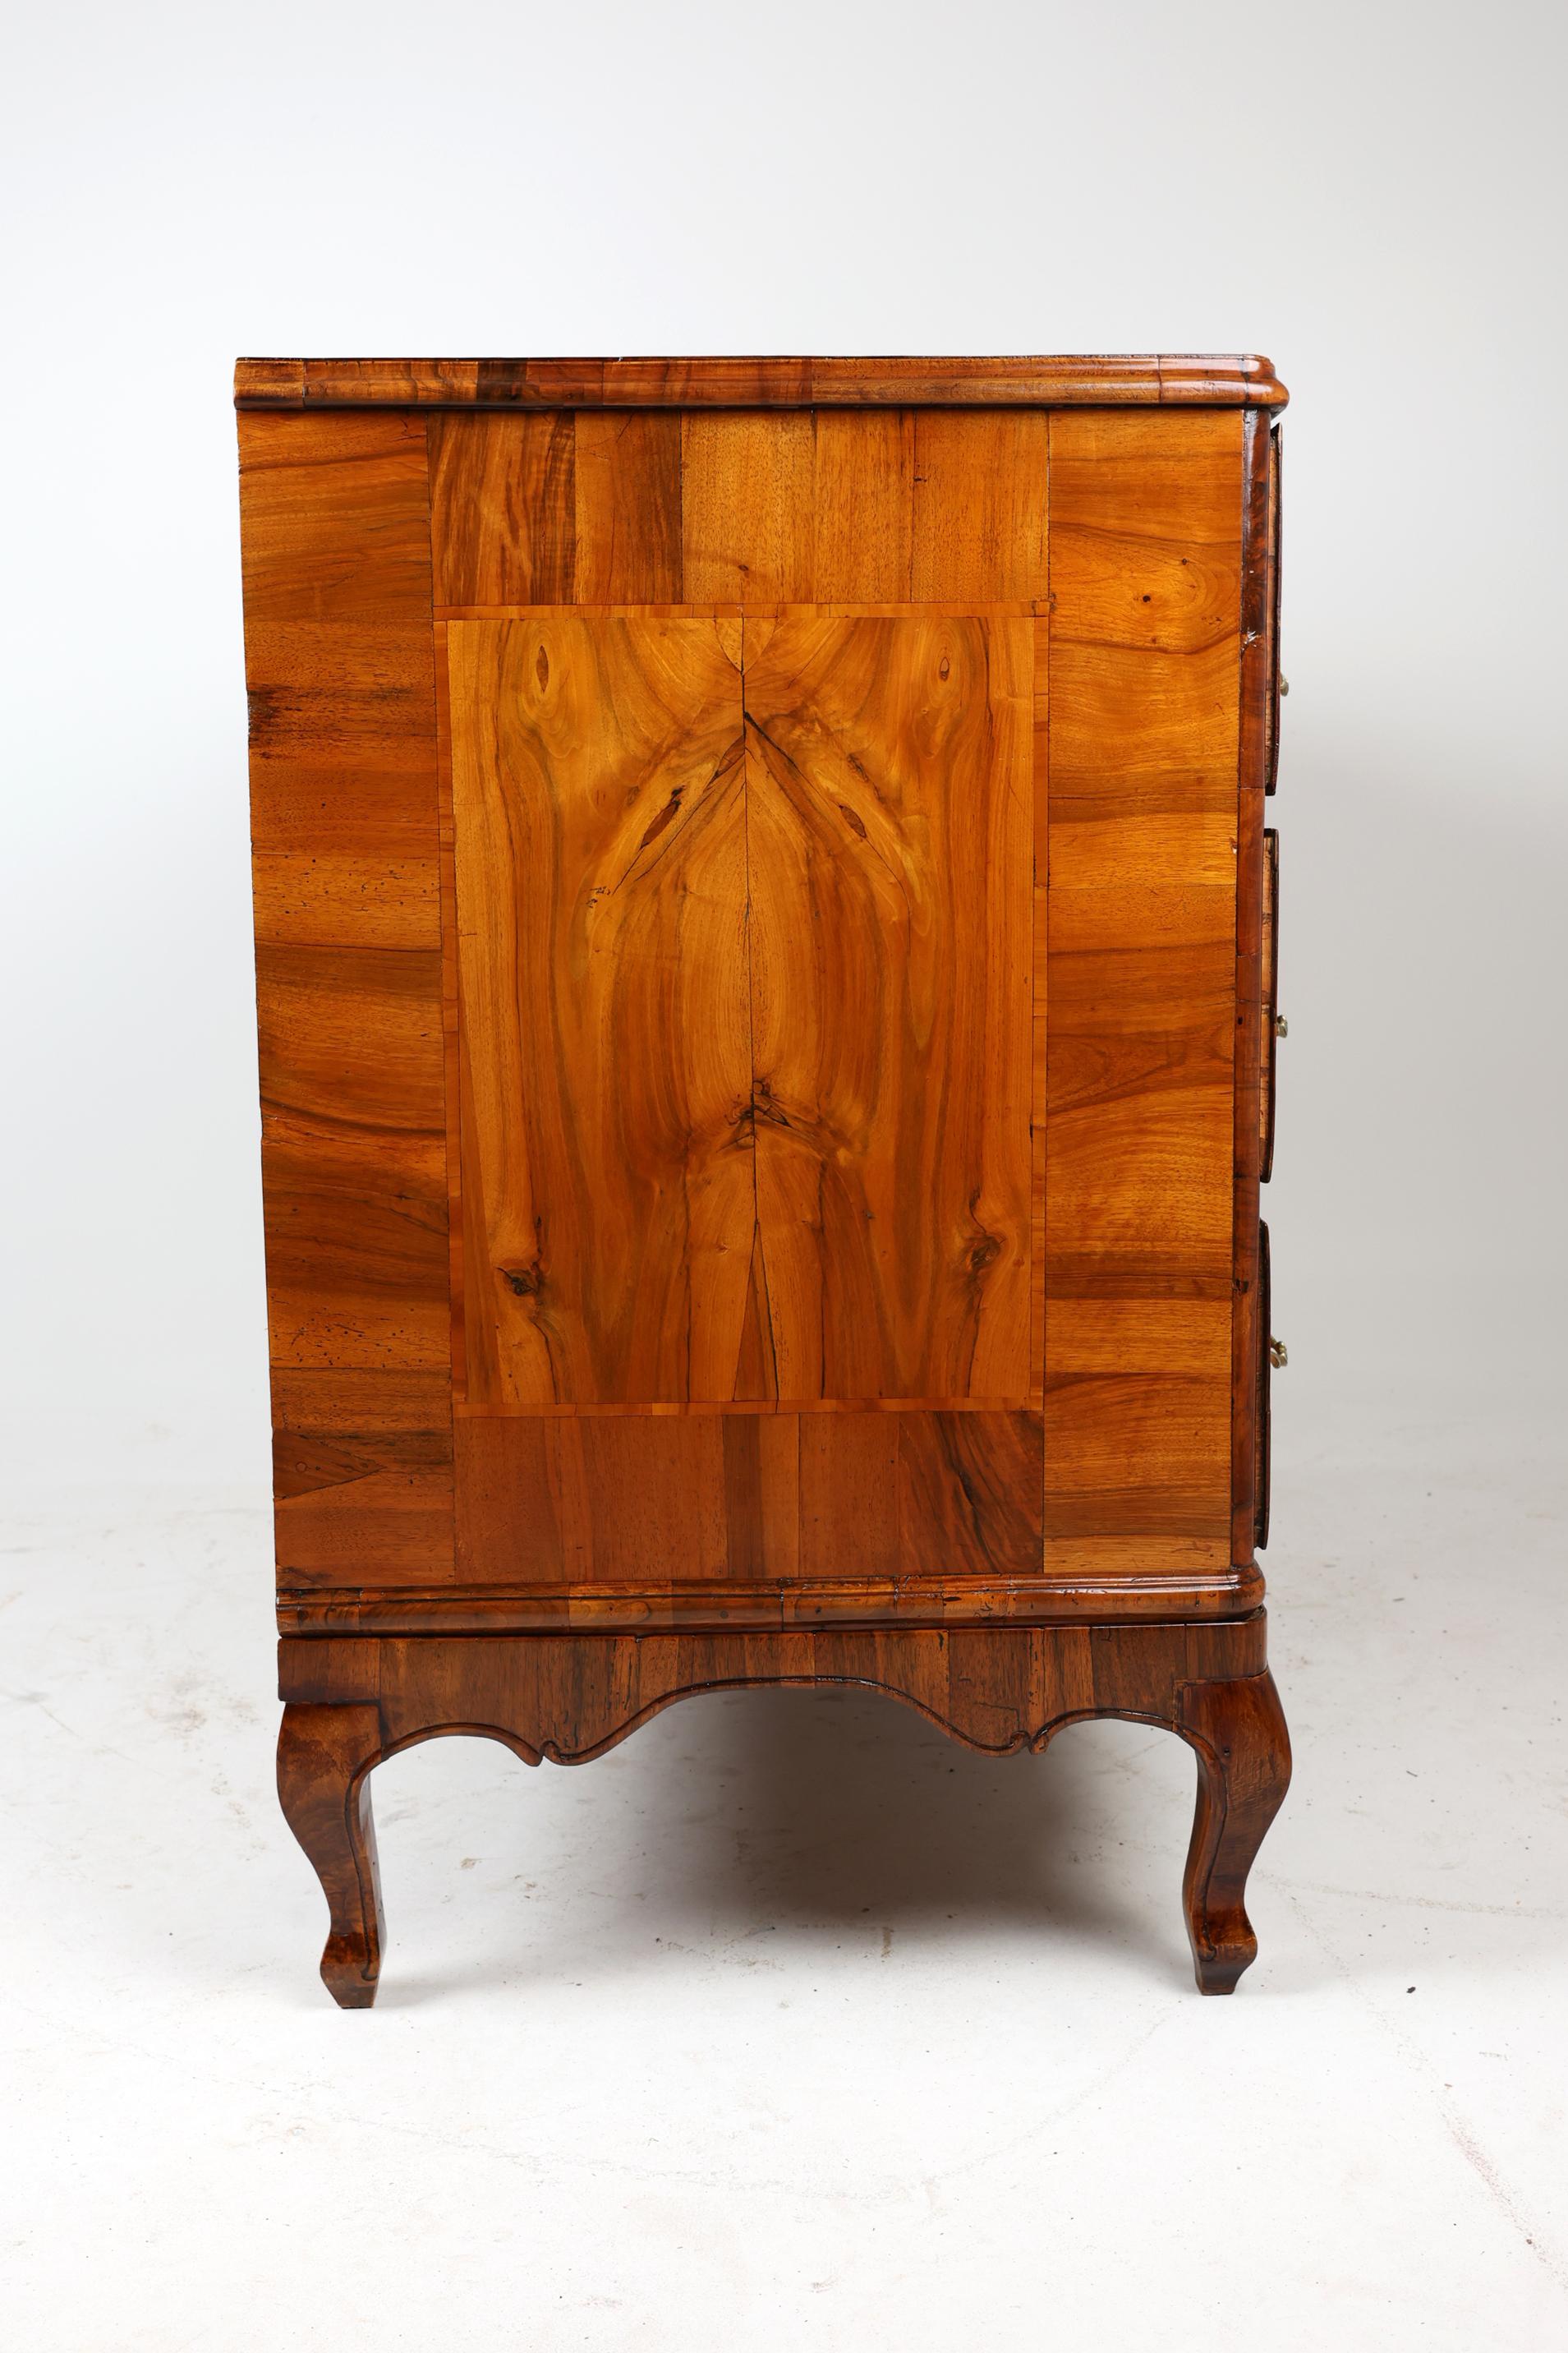 Late 18th Century Baroque Commode with Burl Walnut For Sale 3